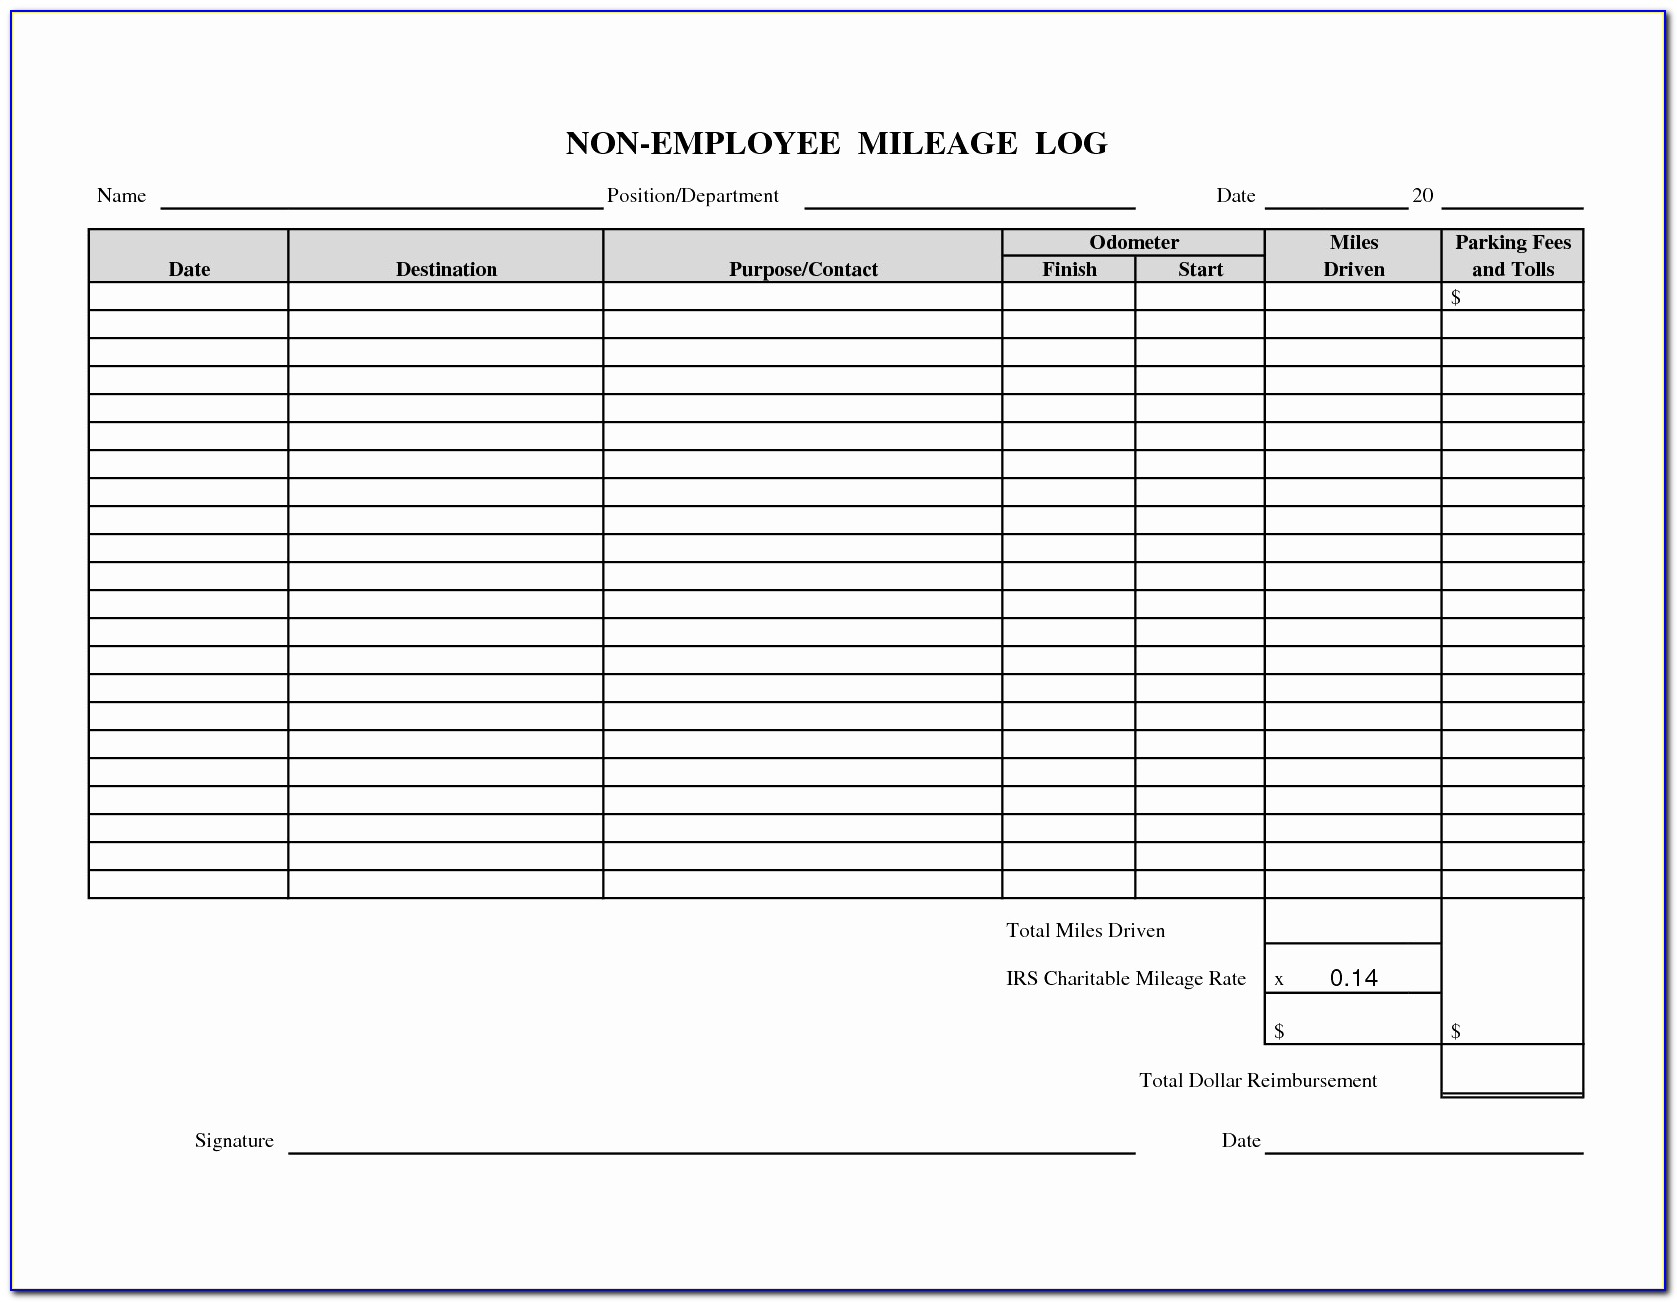 Irs Mileage Log Book Template Lovely Irs Mileage Log Form Awesome Mileage Spreadsheet Template Best